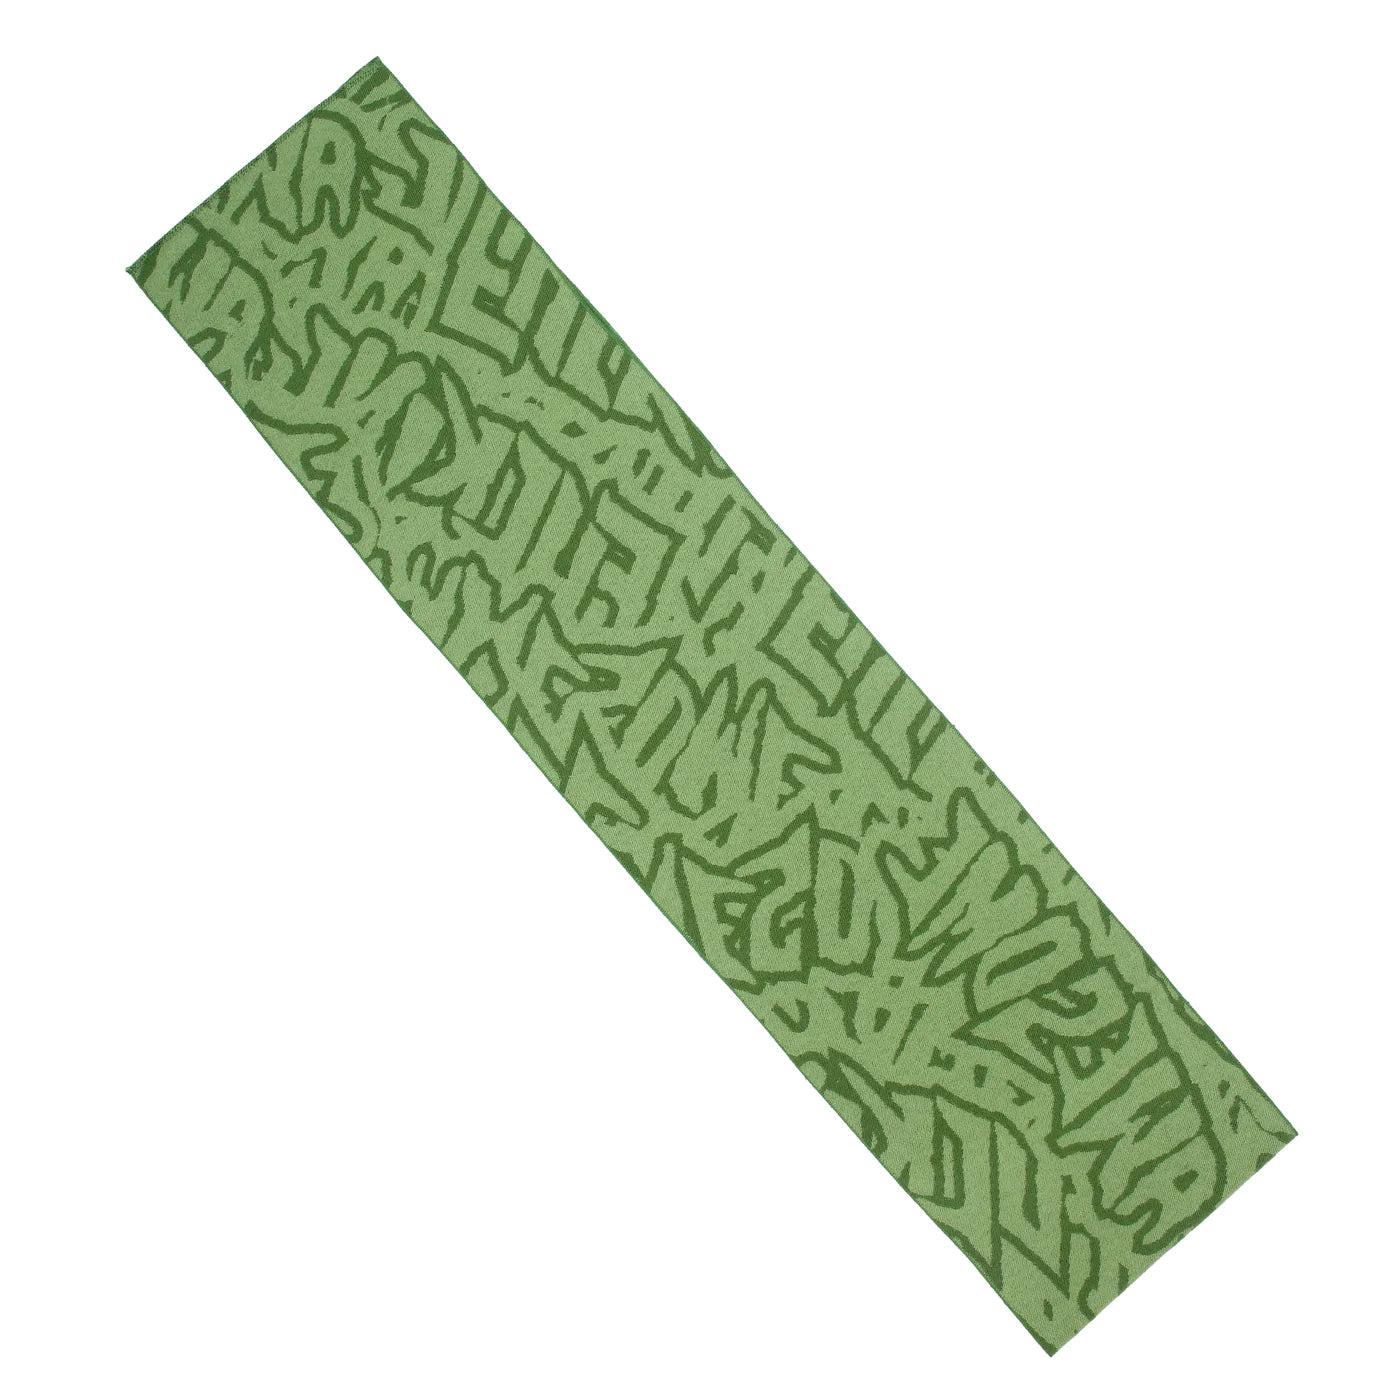 Fucking Awesome Sticker Stamp Scarf Black